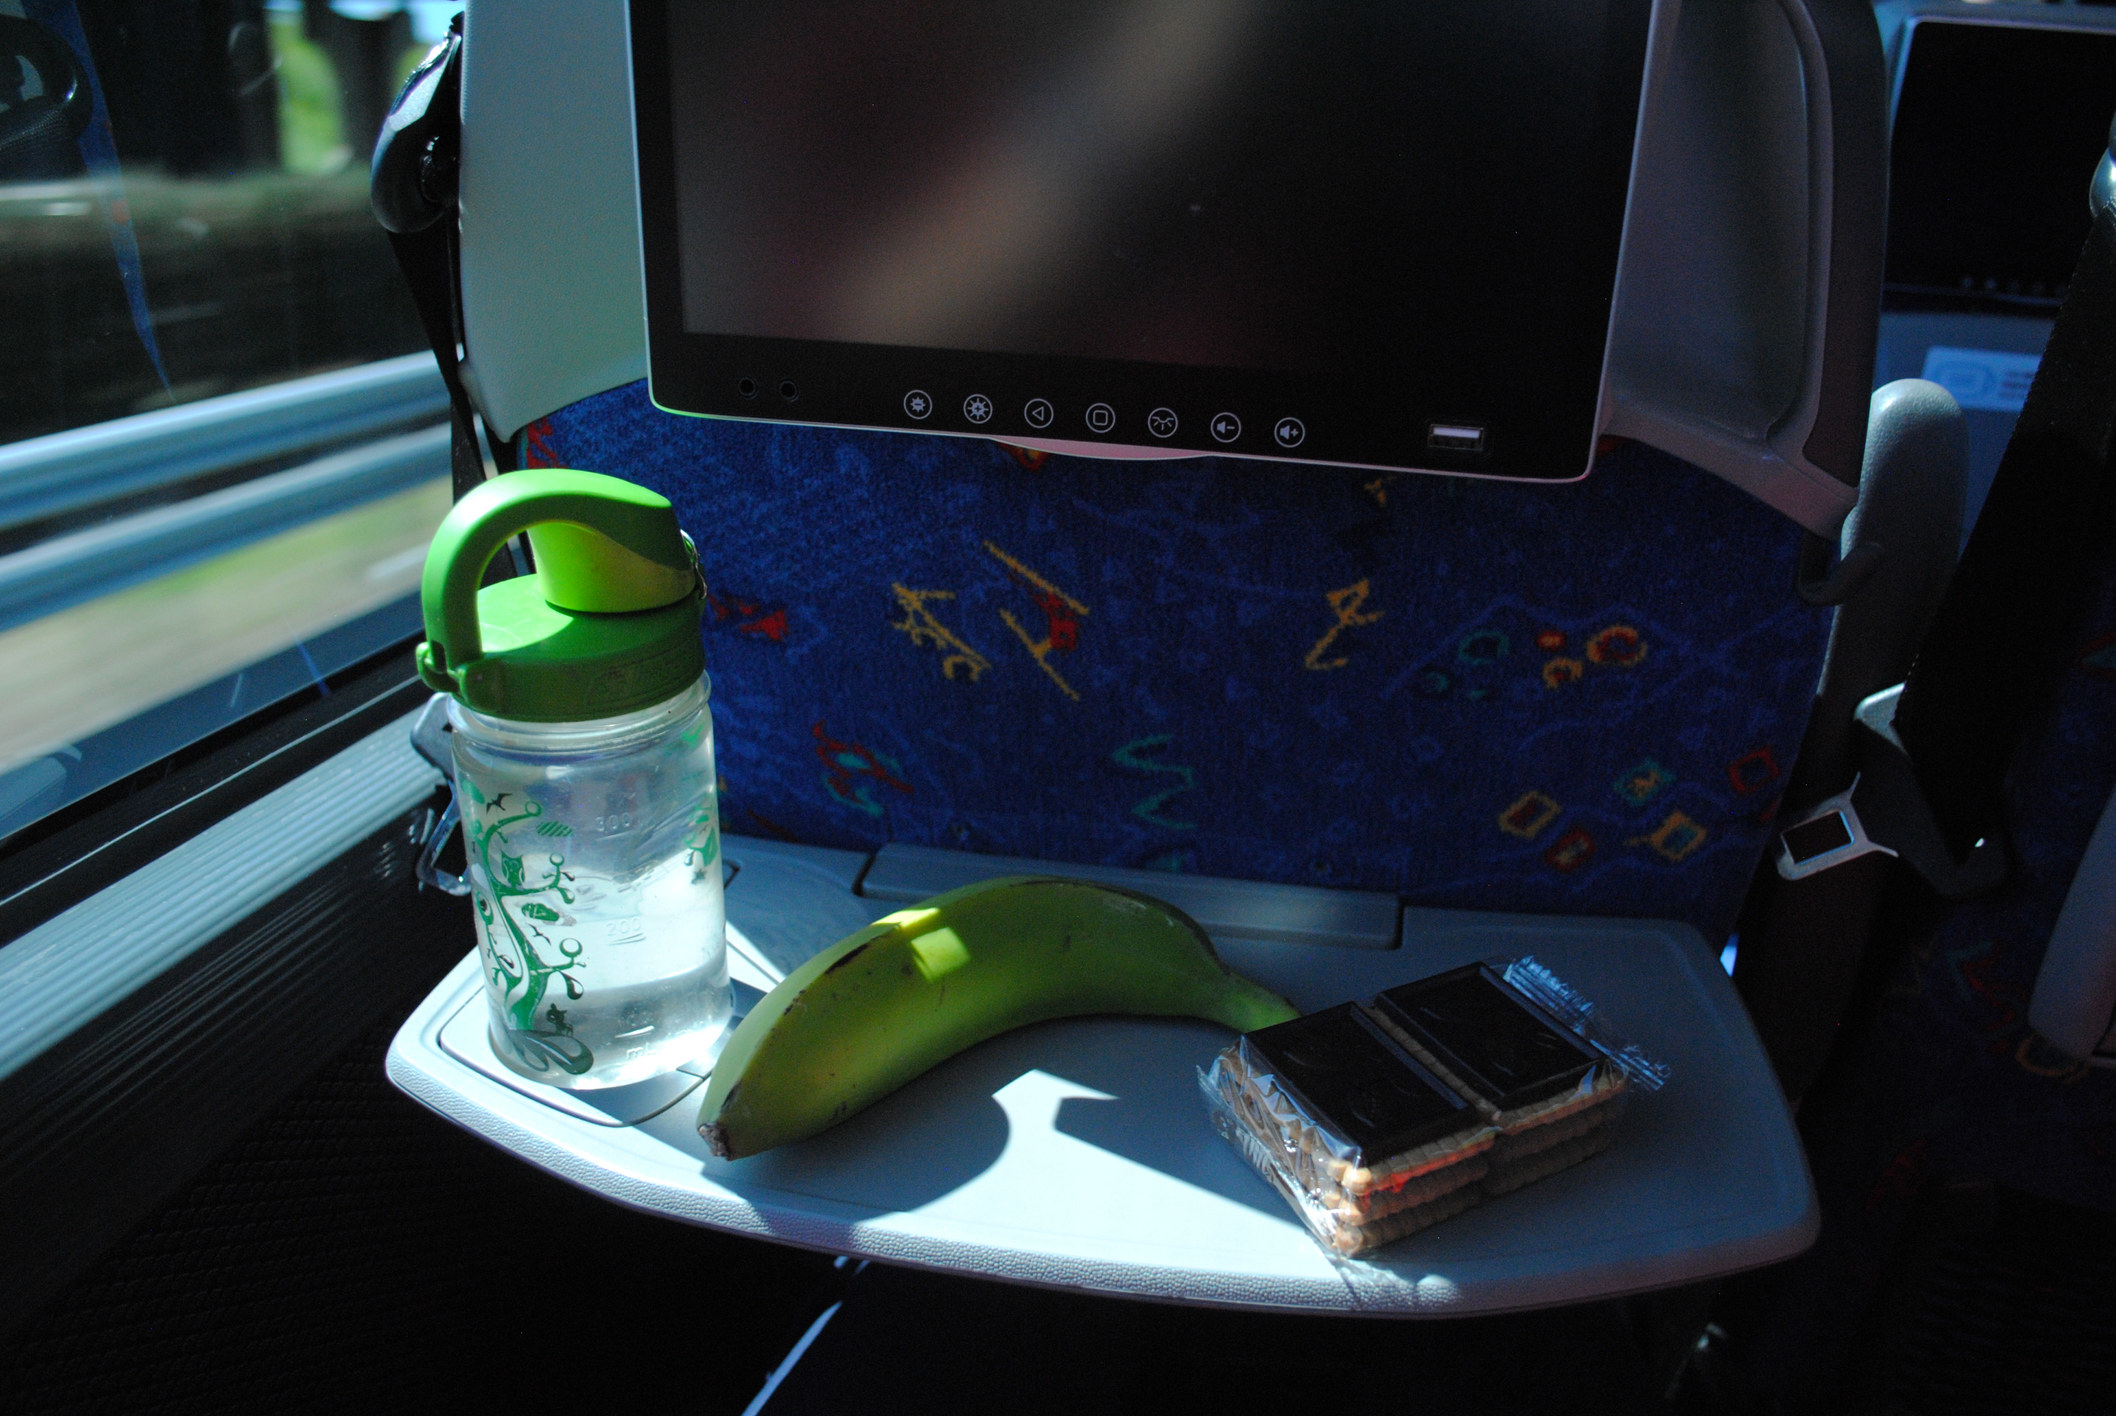 A tray table with a water bottle, banana, and cookies